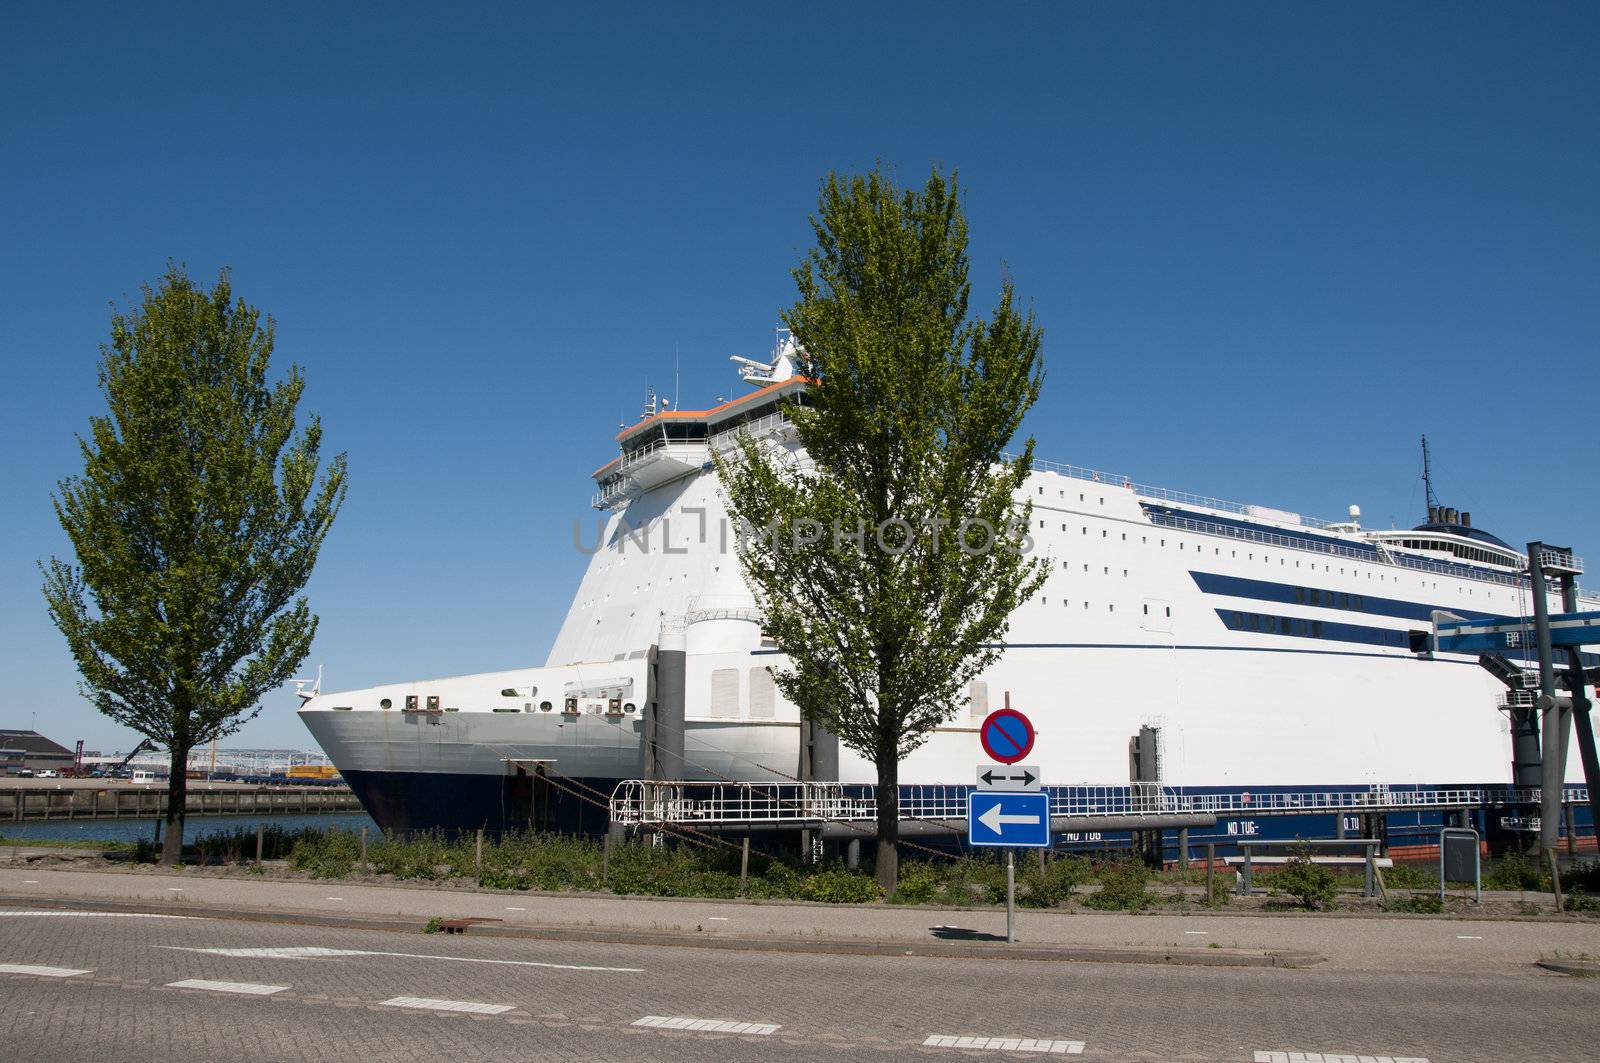 cruise ship  by compuinfoto